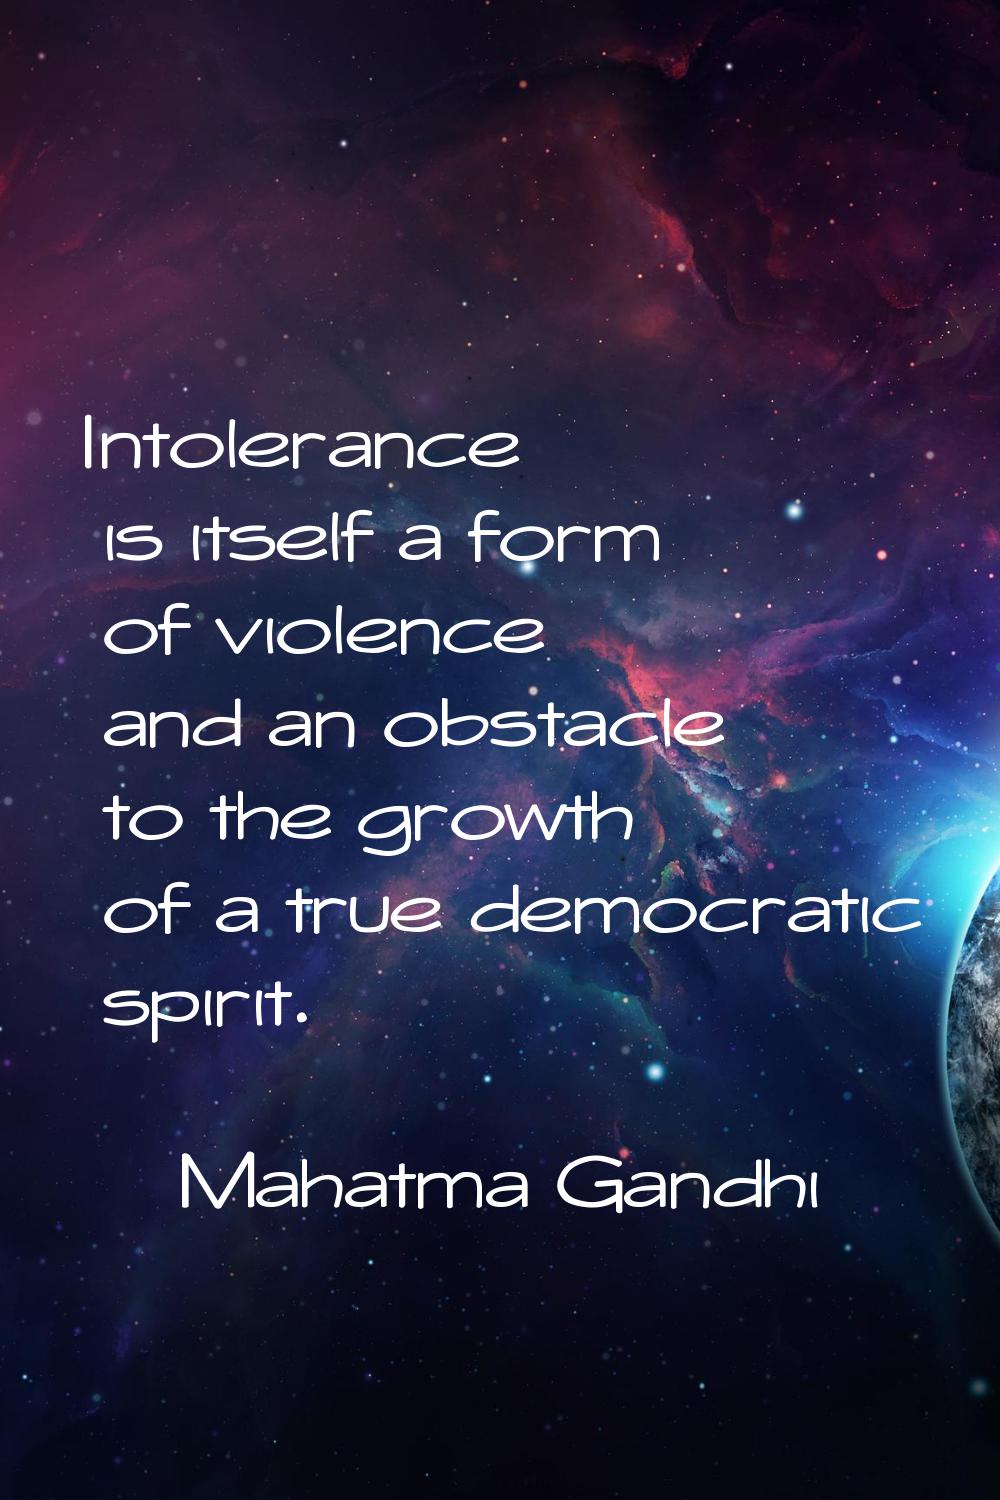 Intolerance is itself a form of violence and an obstacle to the growth of a true democratic spirit.